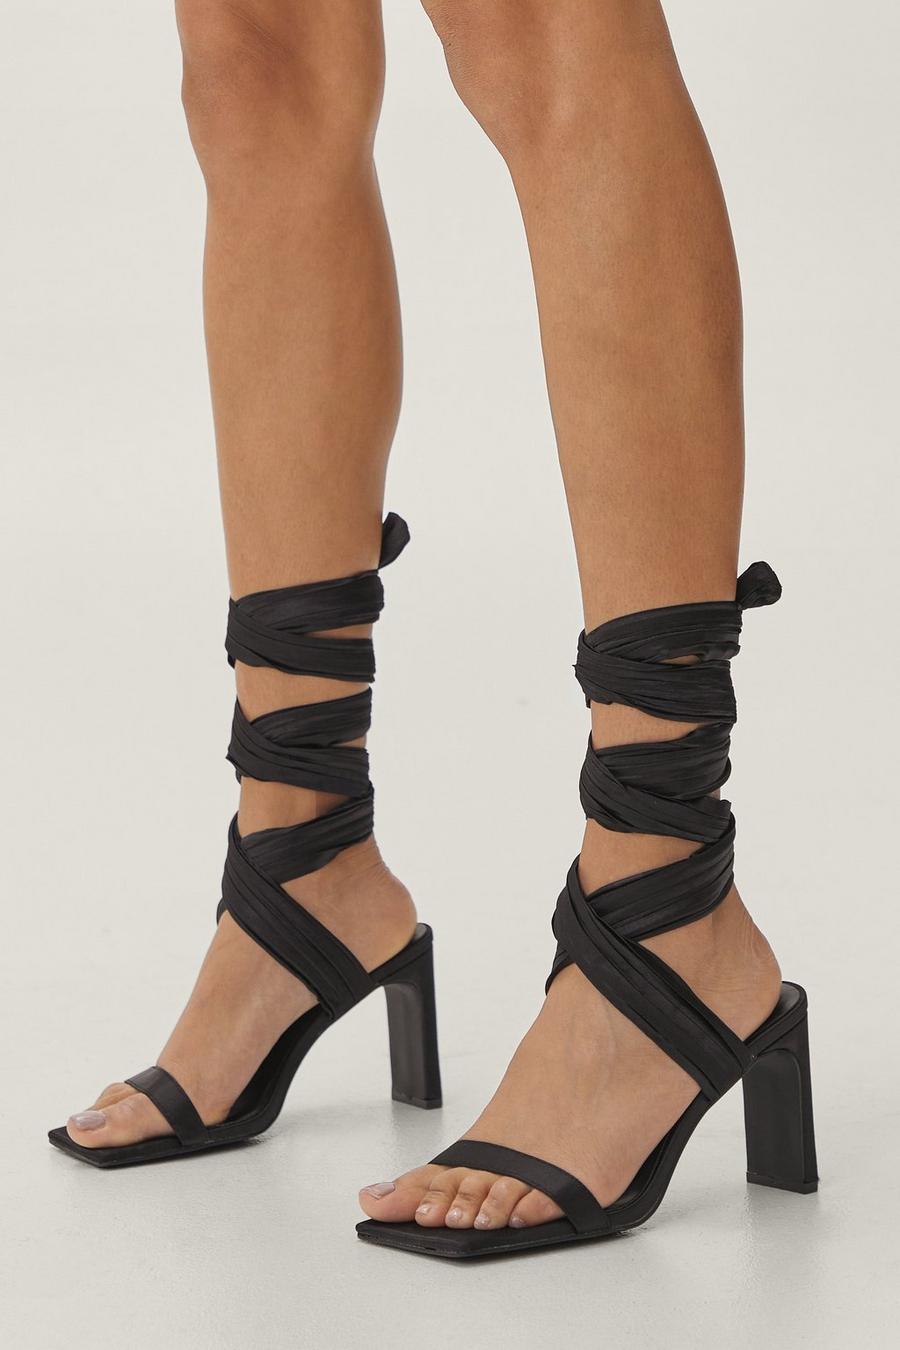 Satin Ankle Wrap Square Toe Heels